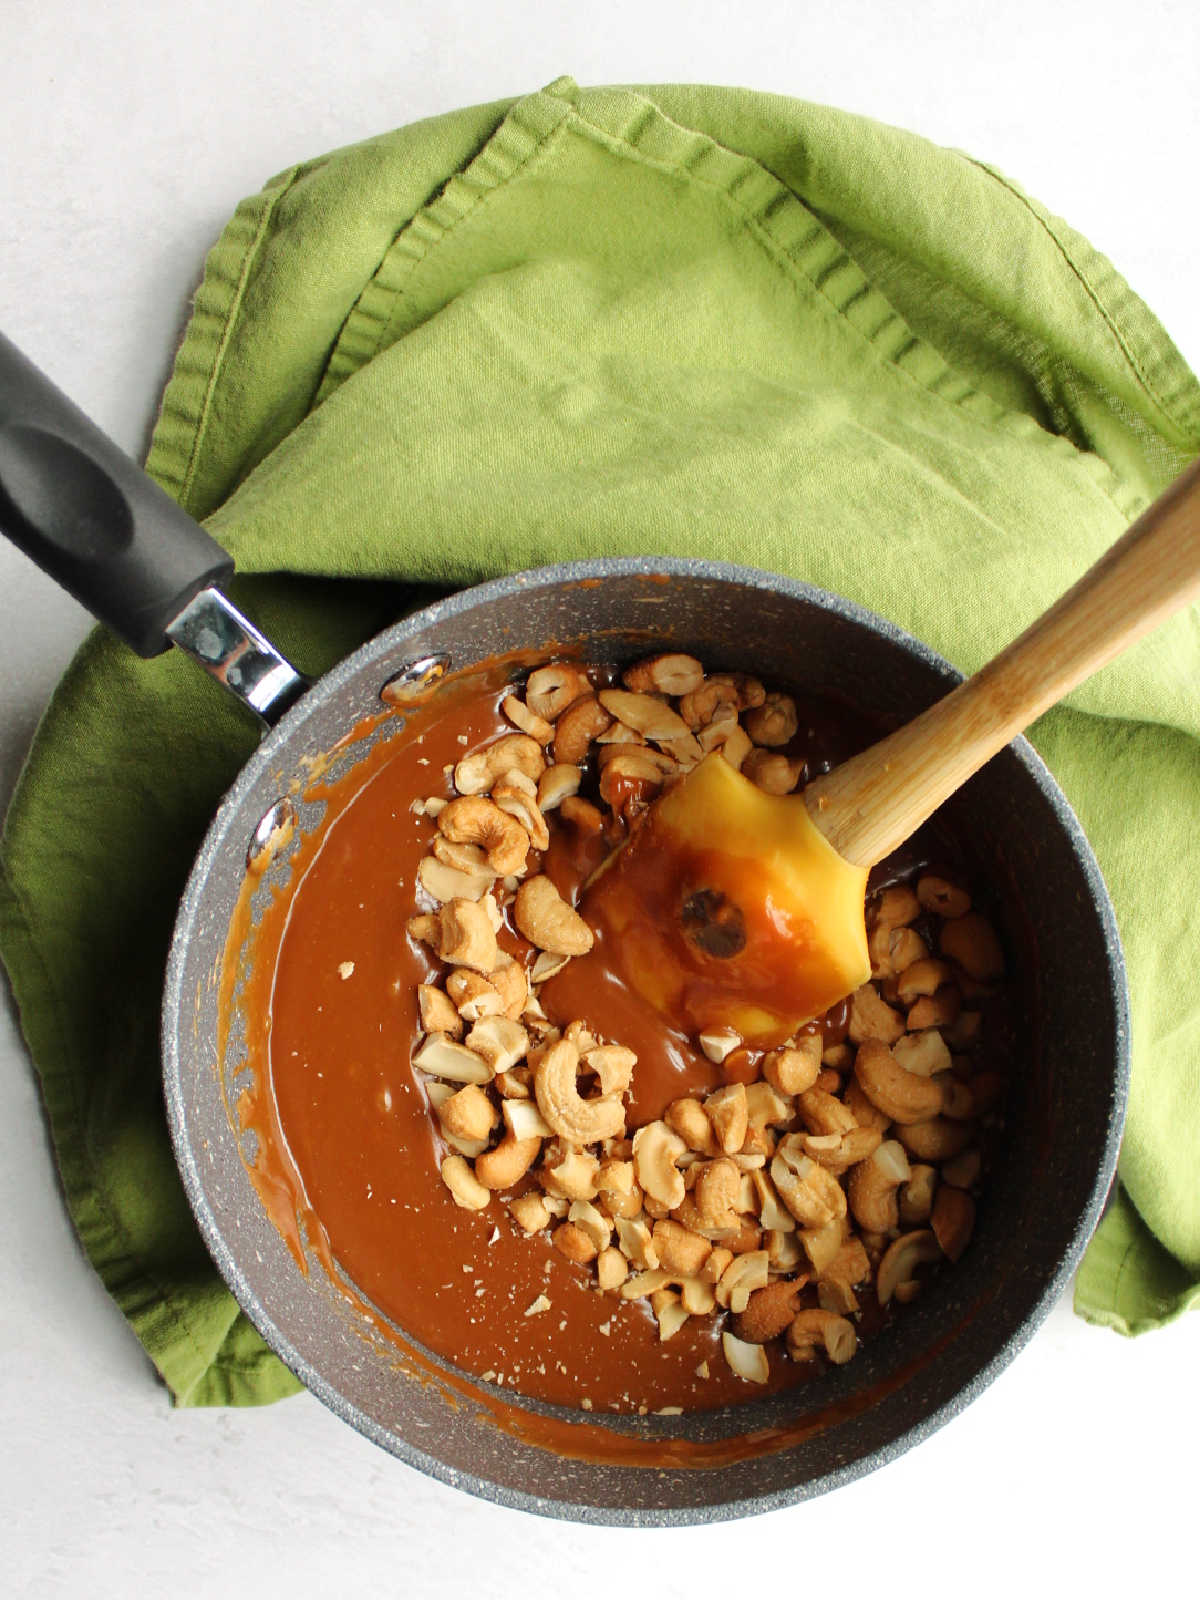 saucepan filled with melted caramel and cashew pieces.